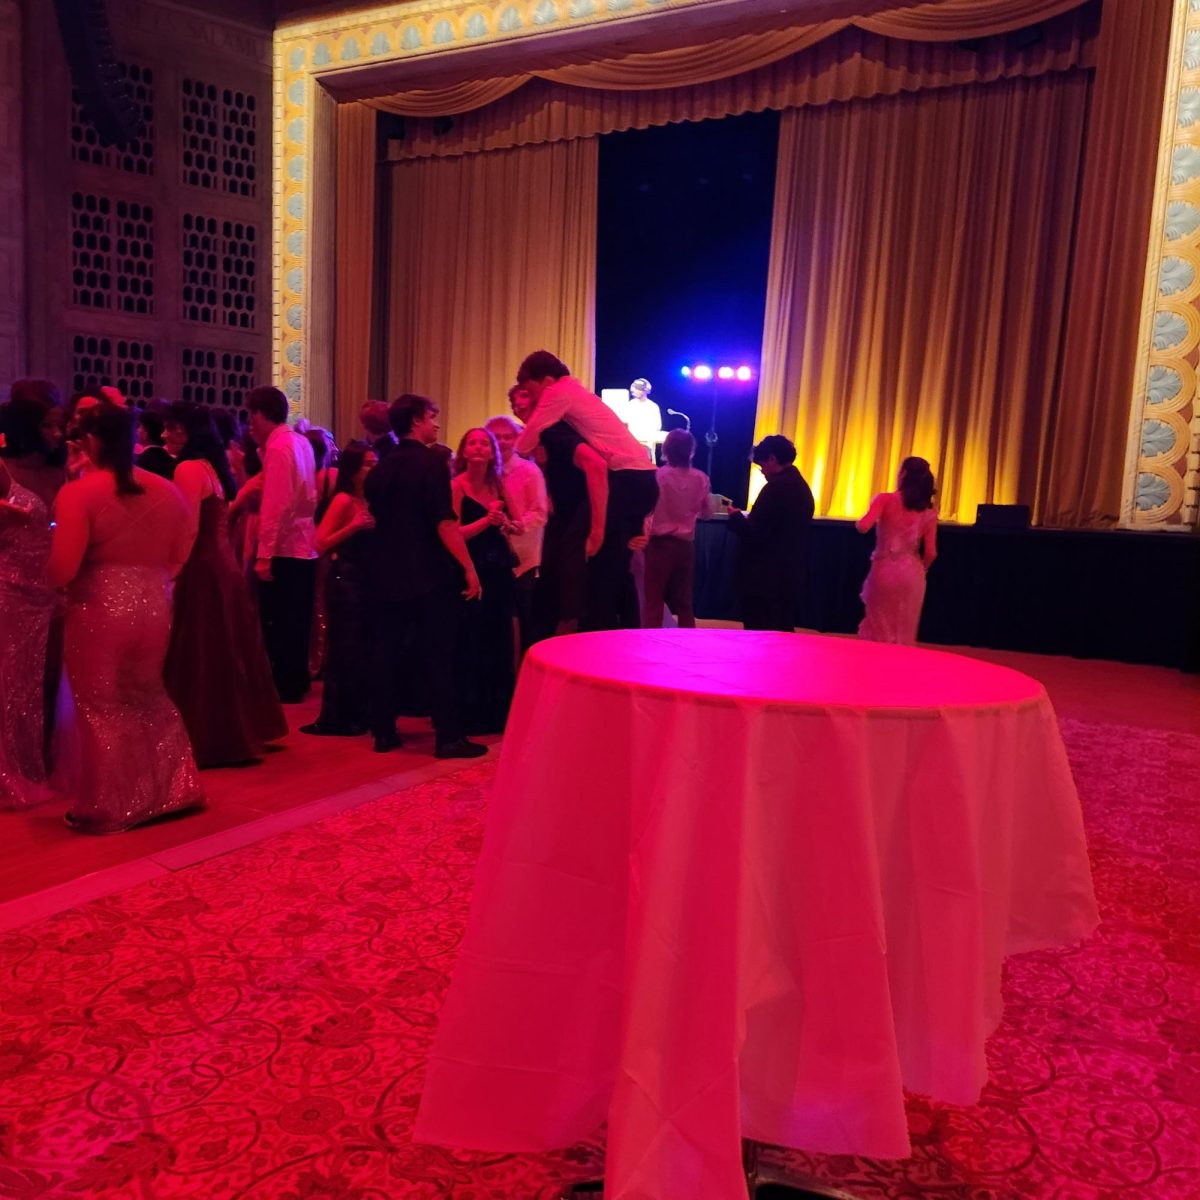 This years prom dance was held in a ballroom at the Portland Art Museum. 